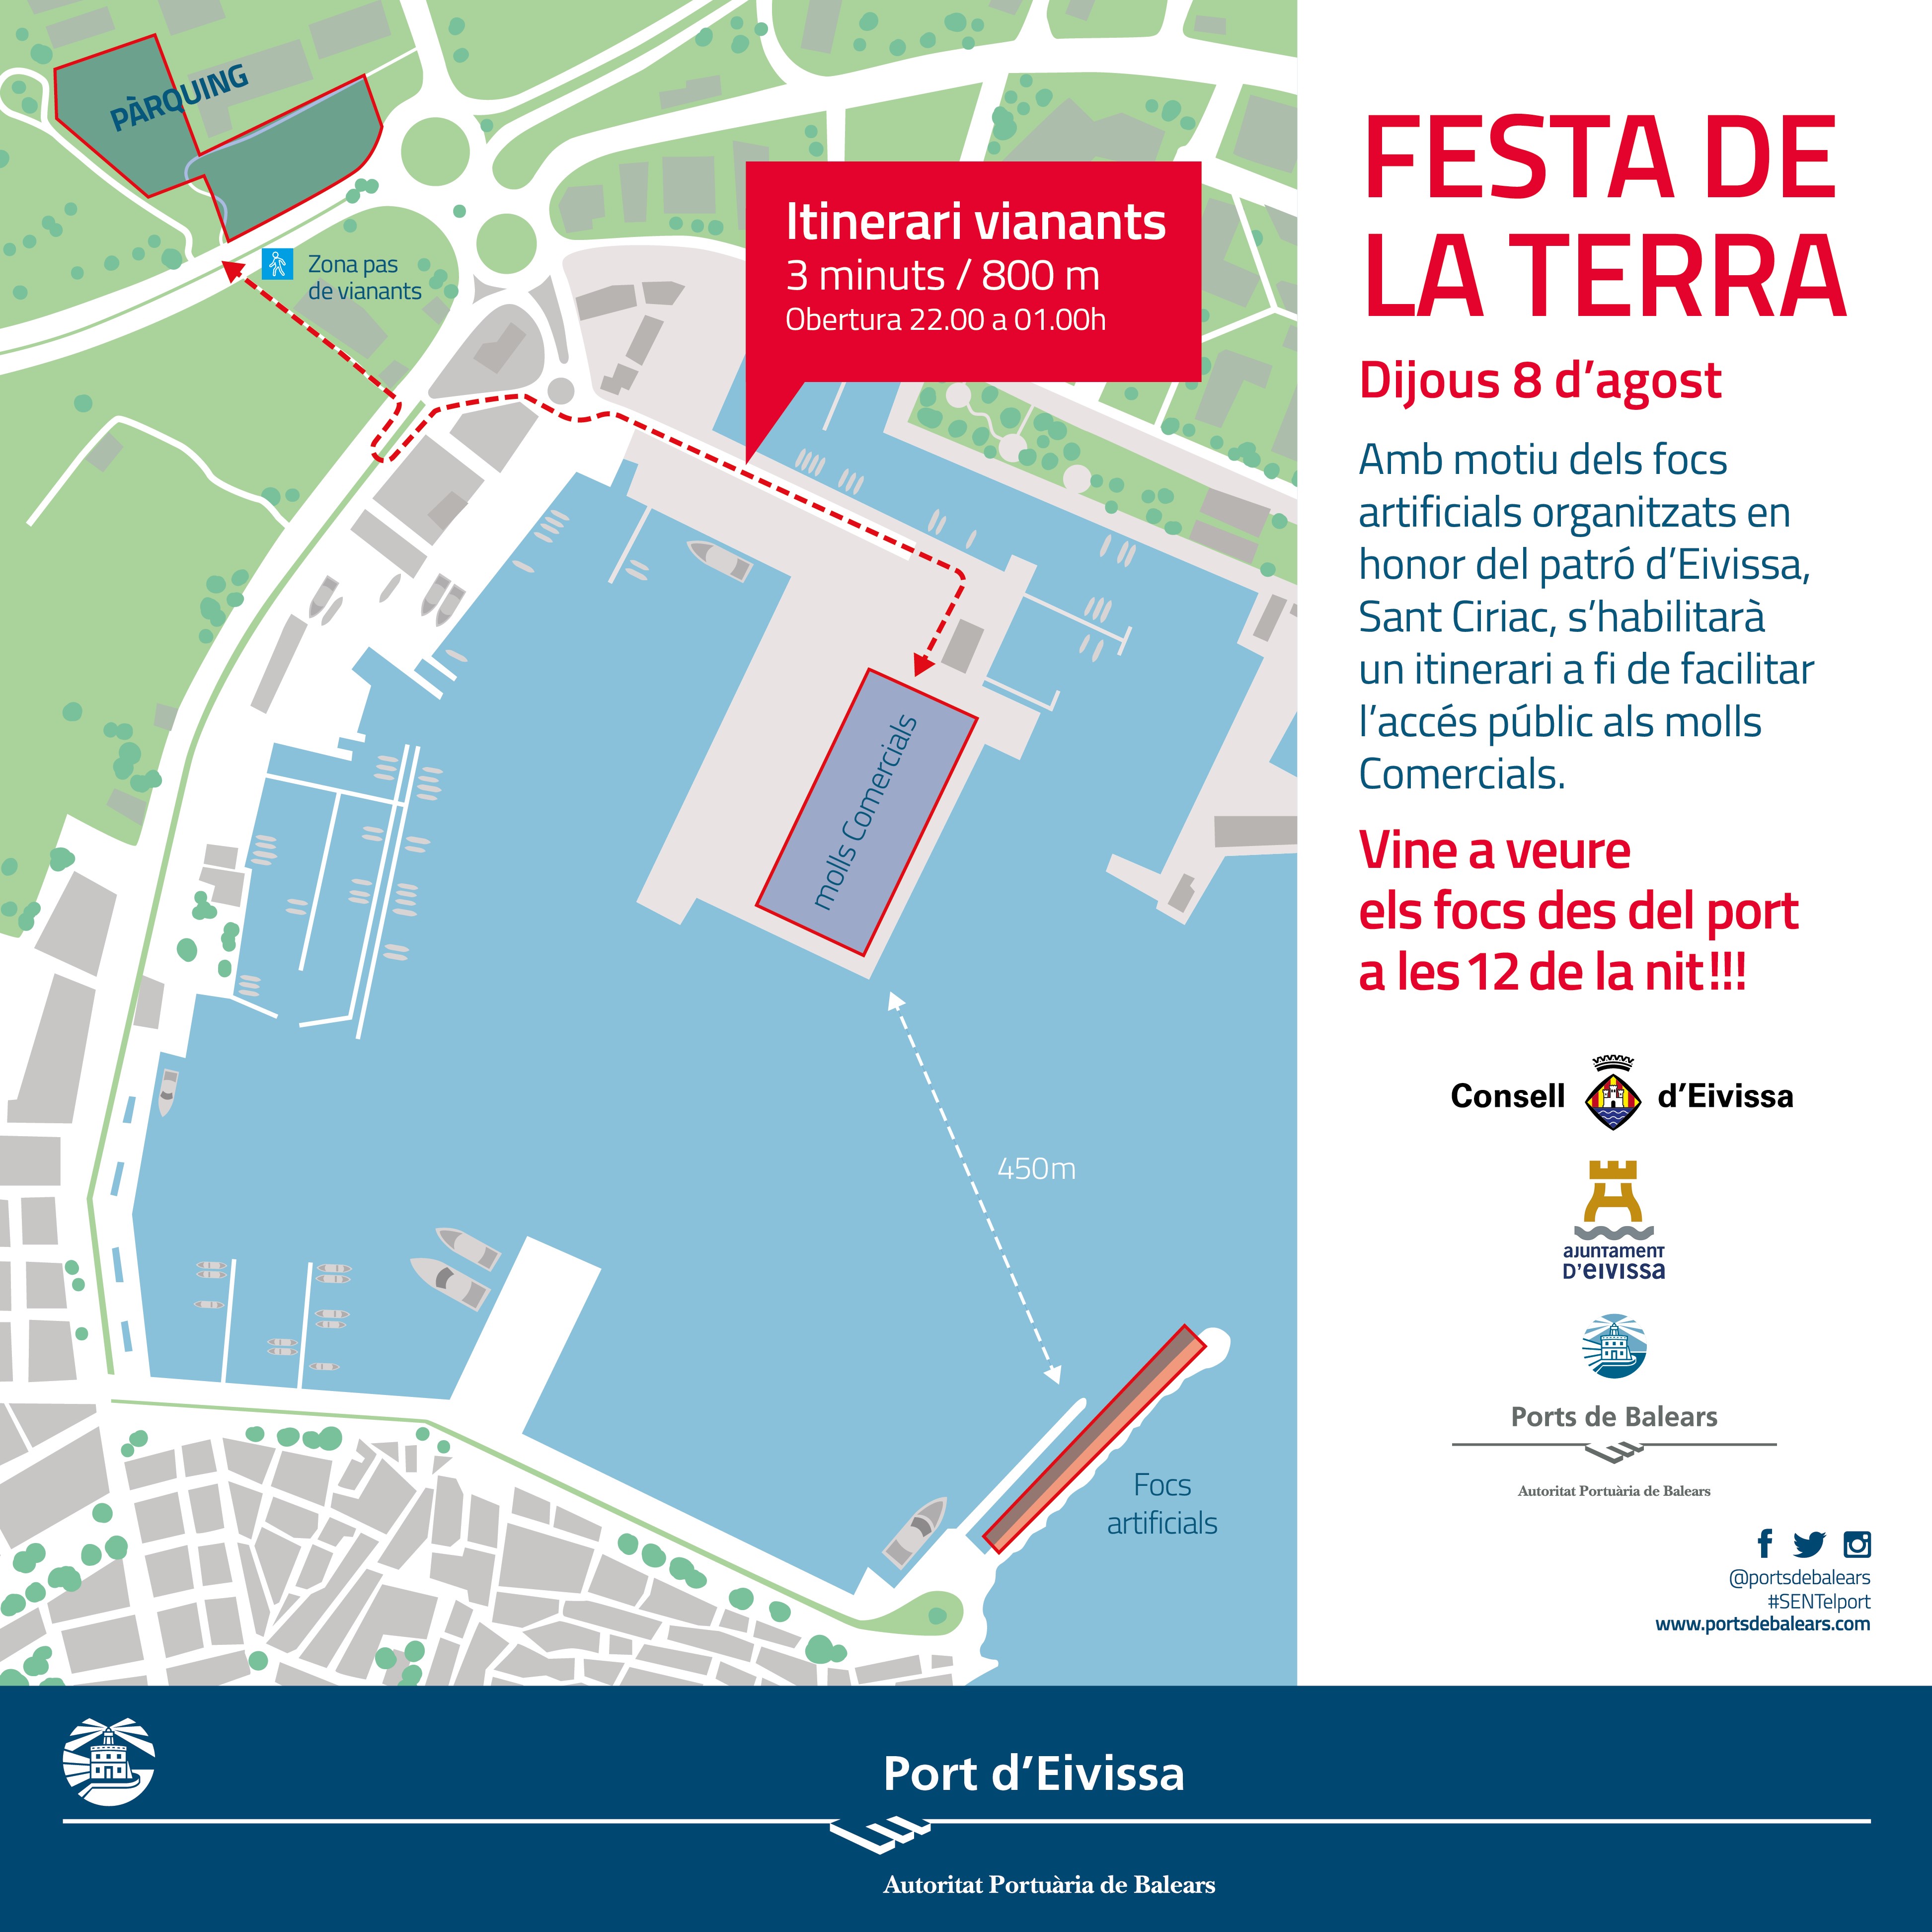 THE APB TO FACILITATE ACCESS TO THE COMMERCIAL QUAYS TO GIVE THE PUBLIC A BETTER VIEW OF THE FIREWORKS OF THE FESTA DE LA TERRA AT THE PORT OF IBIZA.